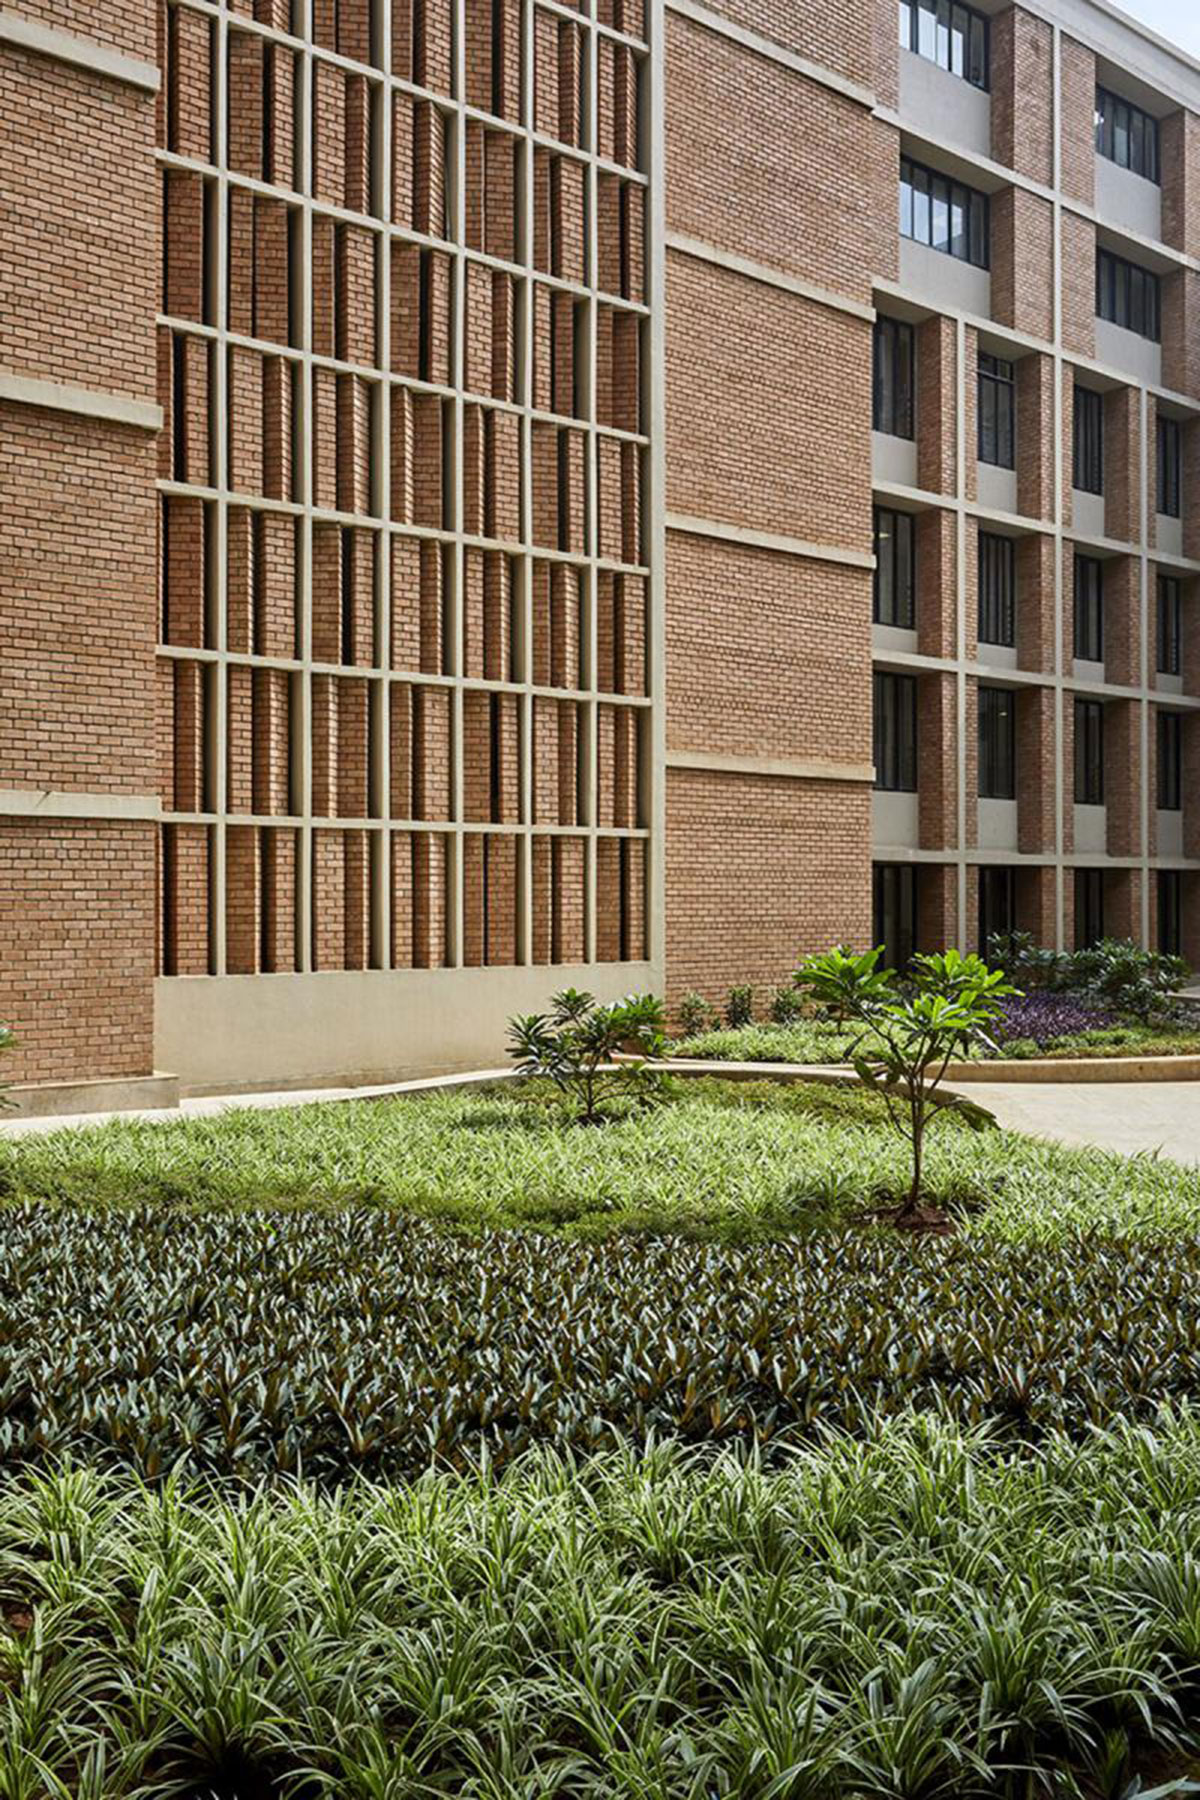 Symbiosis University Hospital and Research Centre | IMK Architects